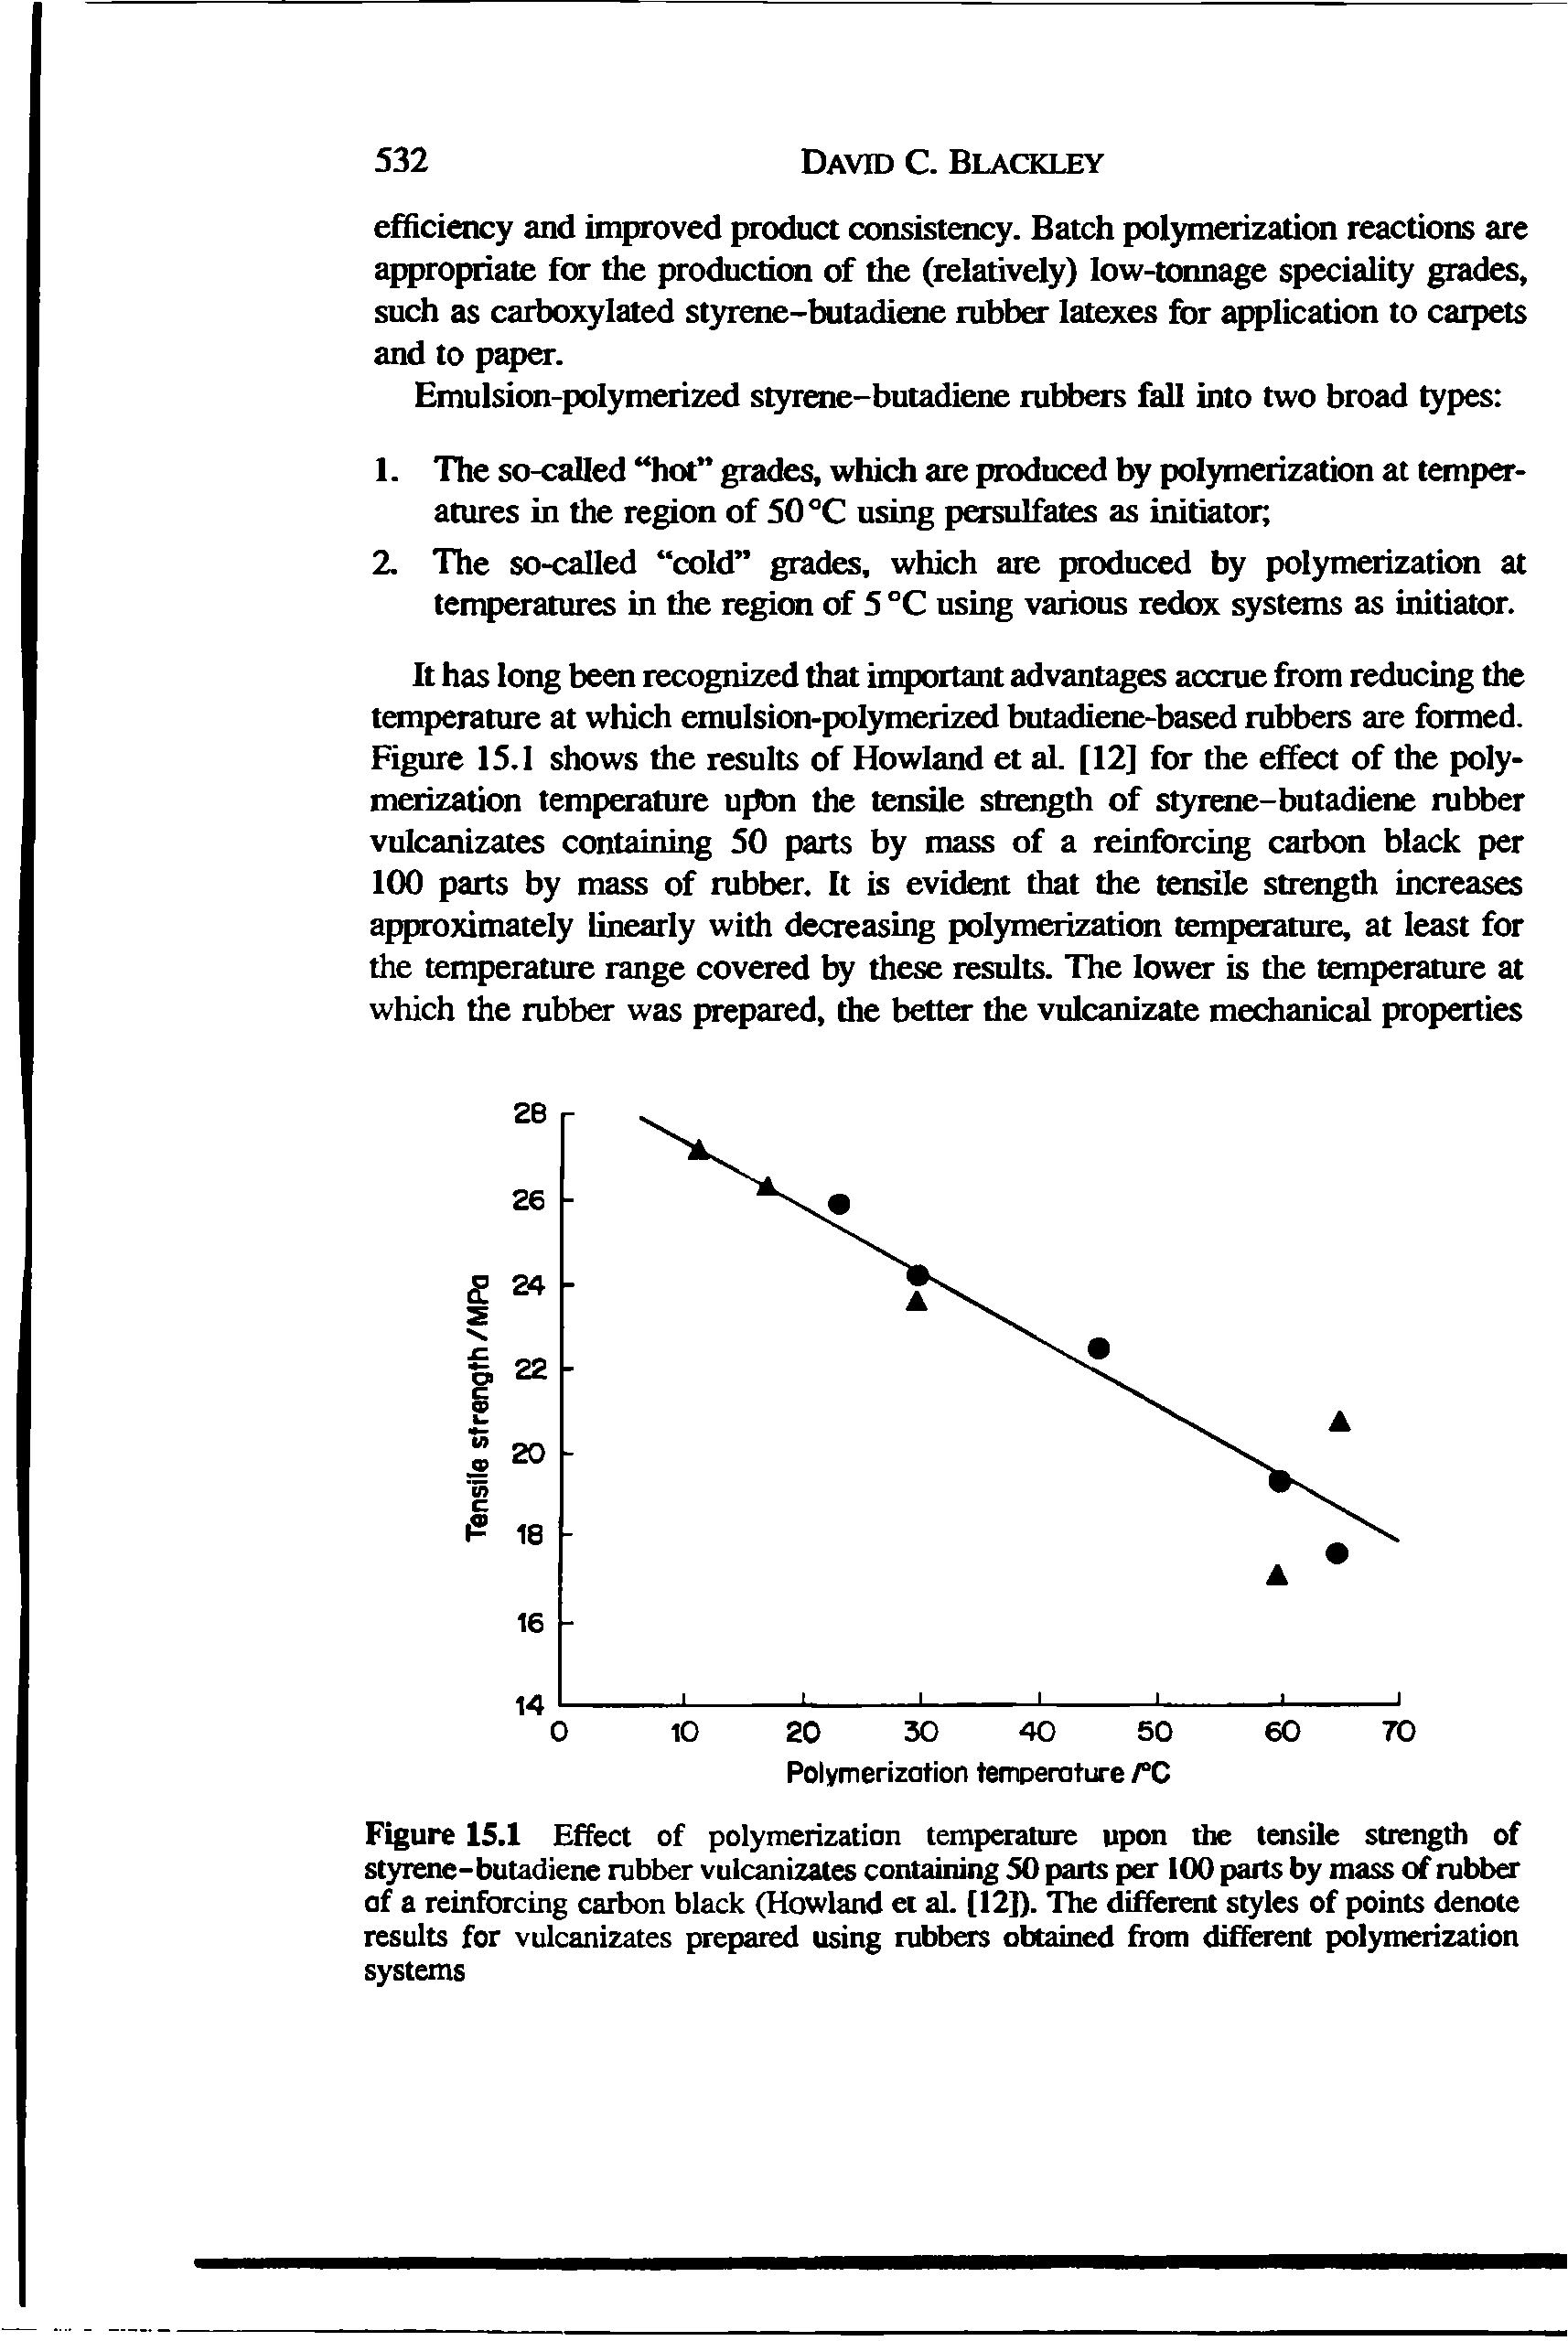 Figure 15.1 Effect of polymerization tenqroatiire upon the tensile strength of styrene-butadiene rubber vulcanizates containiirg SO parts per 100 parts by mass of rubbtf of a reinfotcing carbon black (Howland et aL [12])- The different styles of points denote results for vulcanizates prepared using rubbos obtained from different polymerization systems...